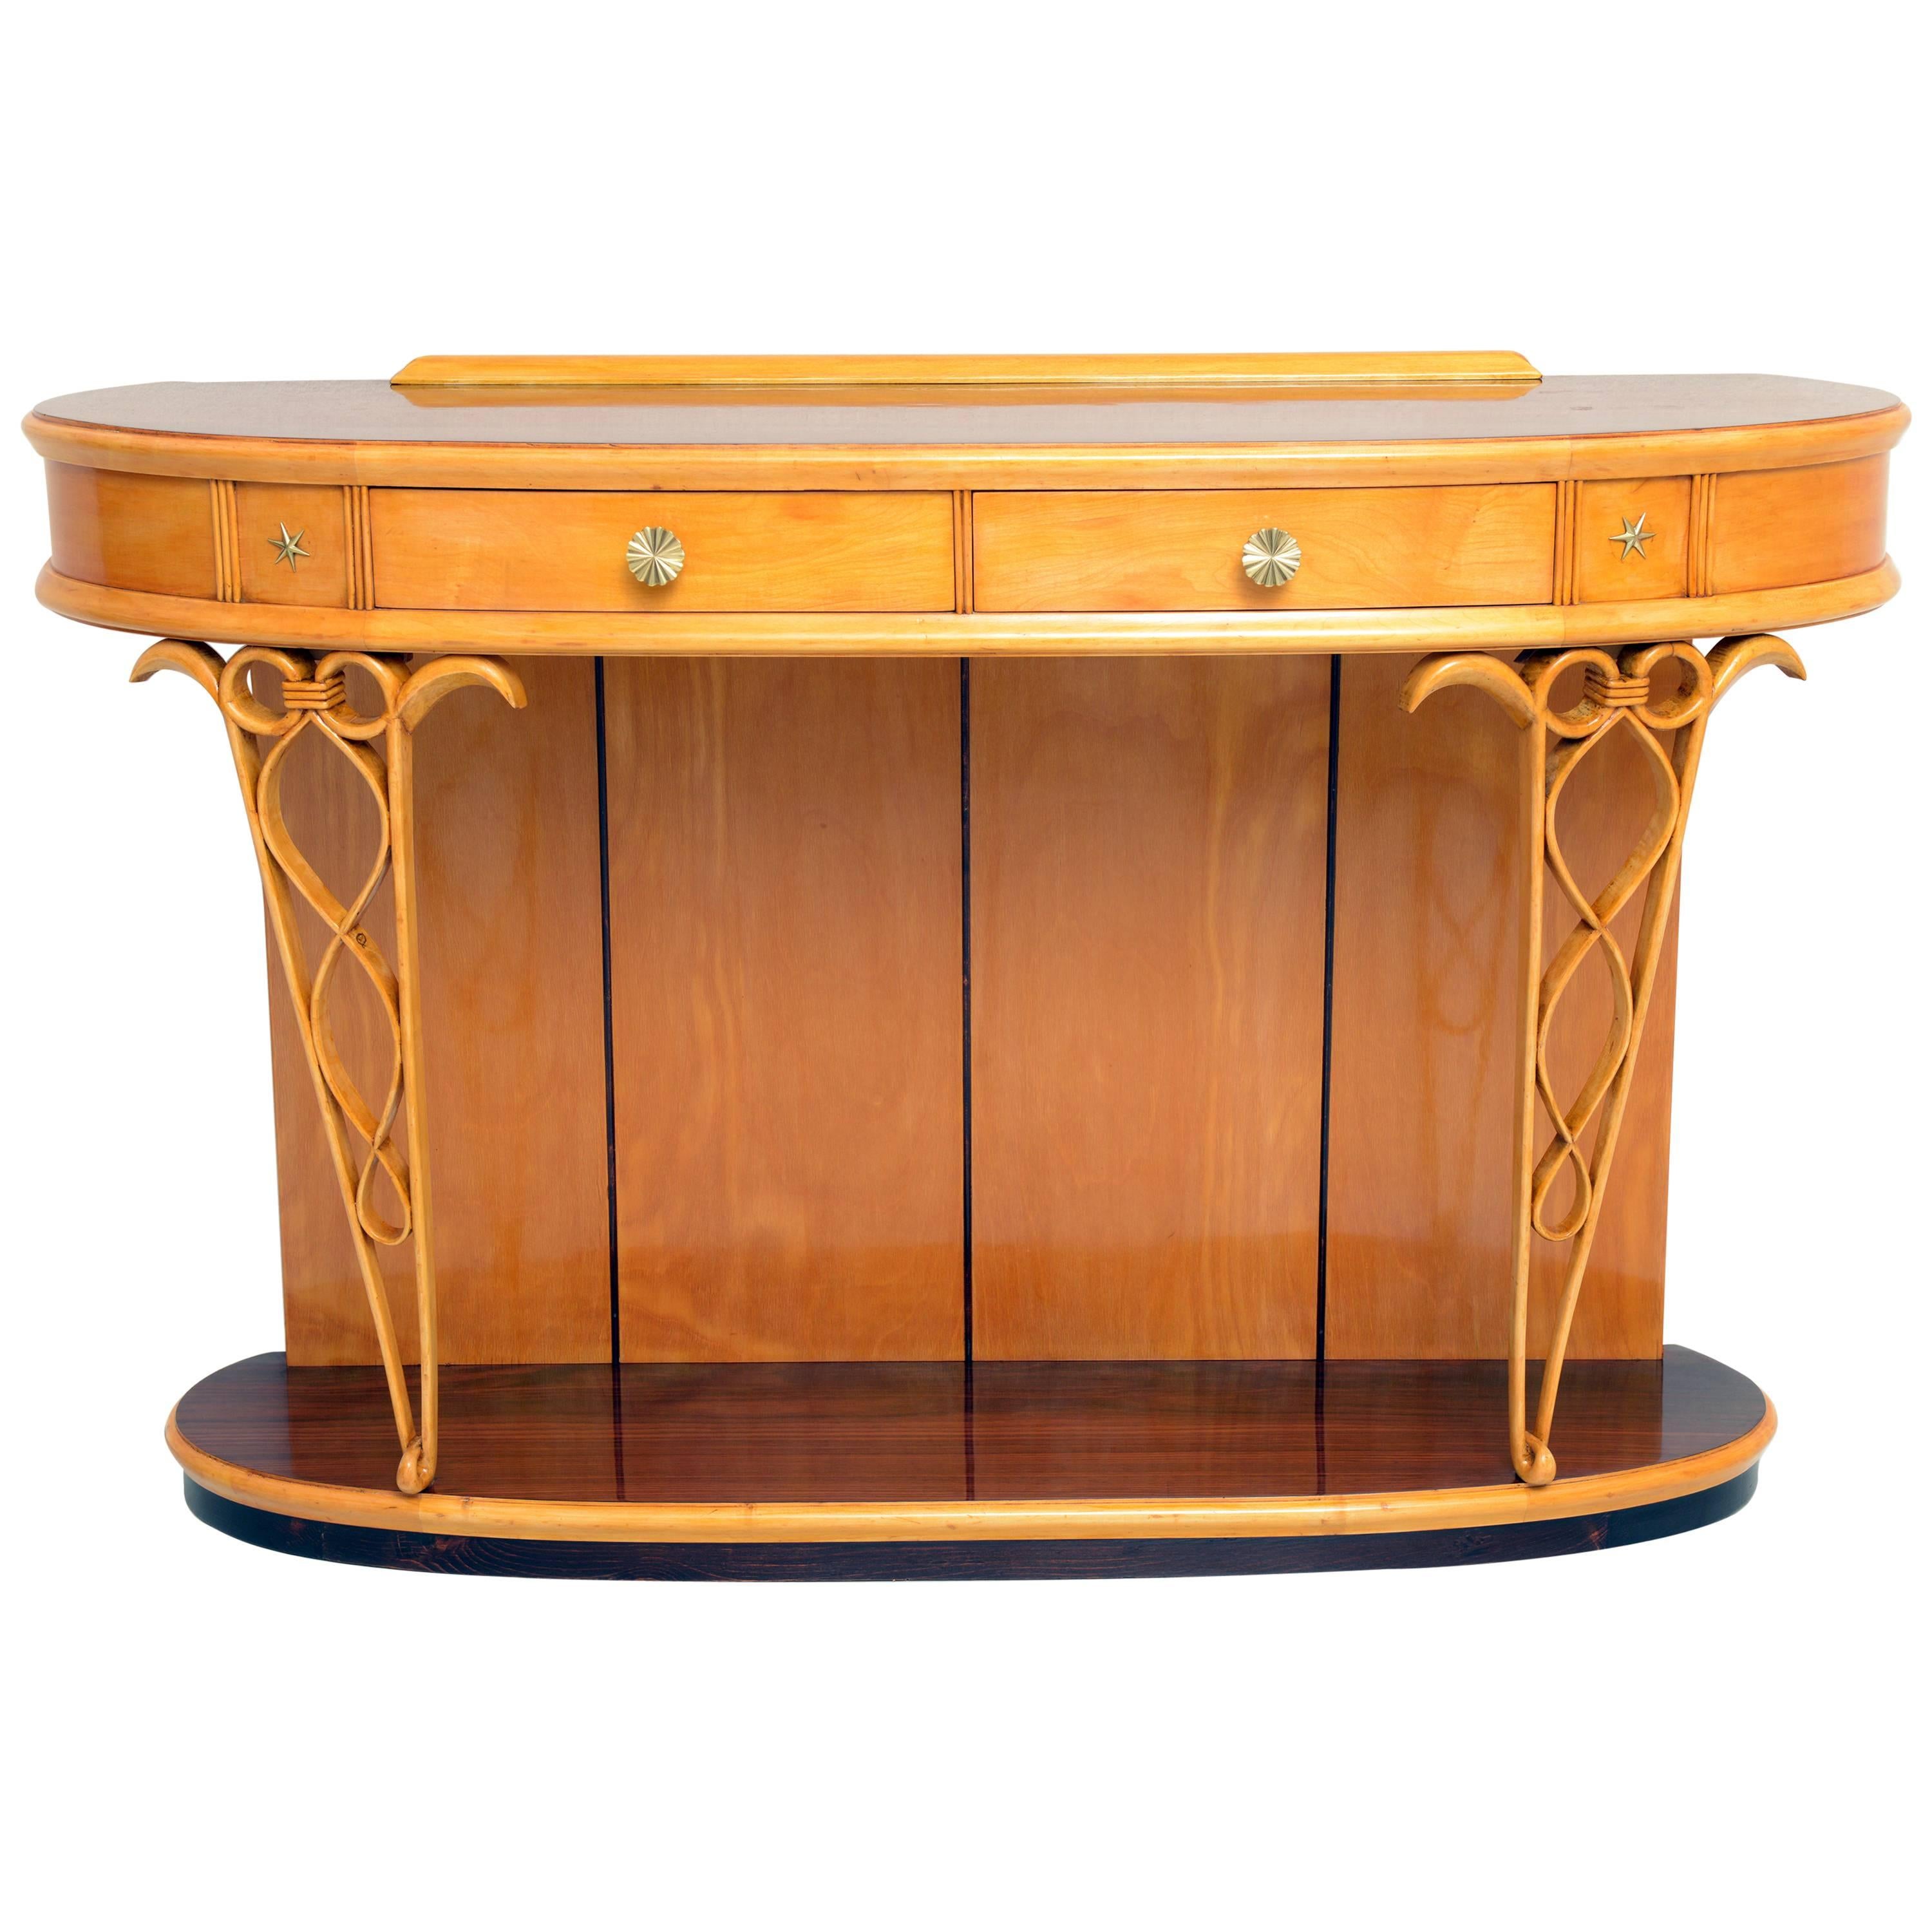 Rounded Italian 1940s Console by Fagioli Firenze